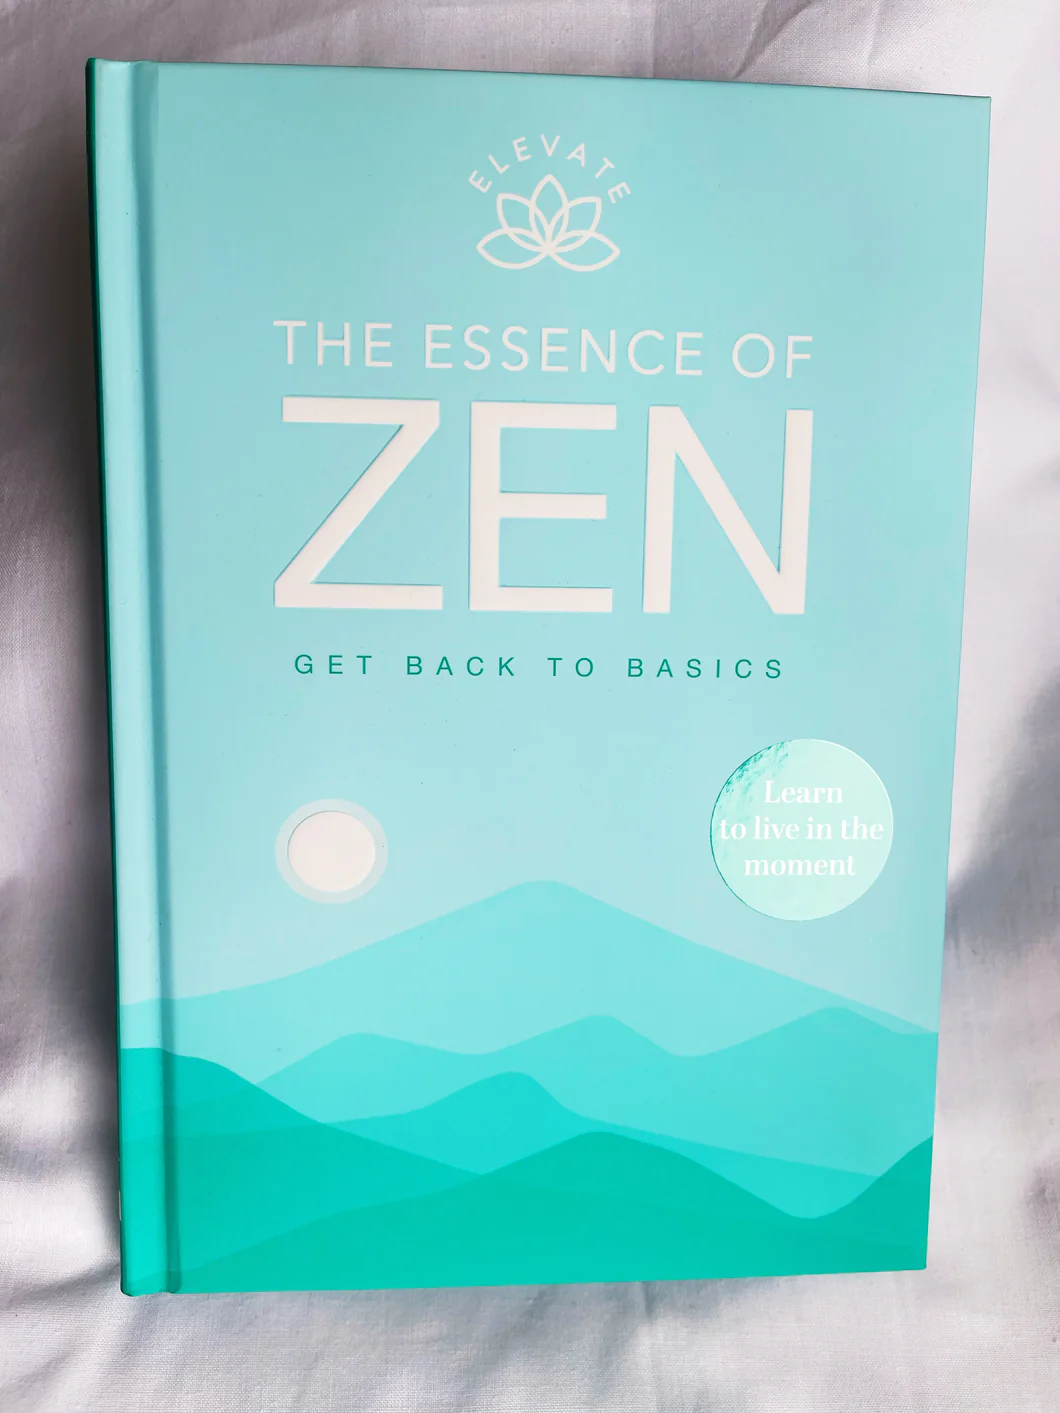 What Is The Essence Of Zen